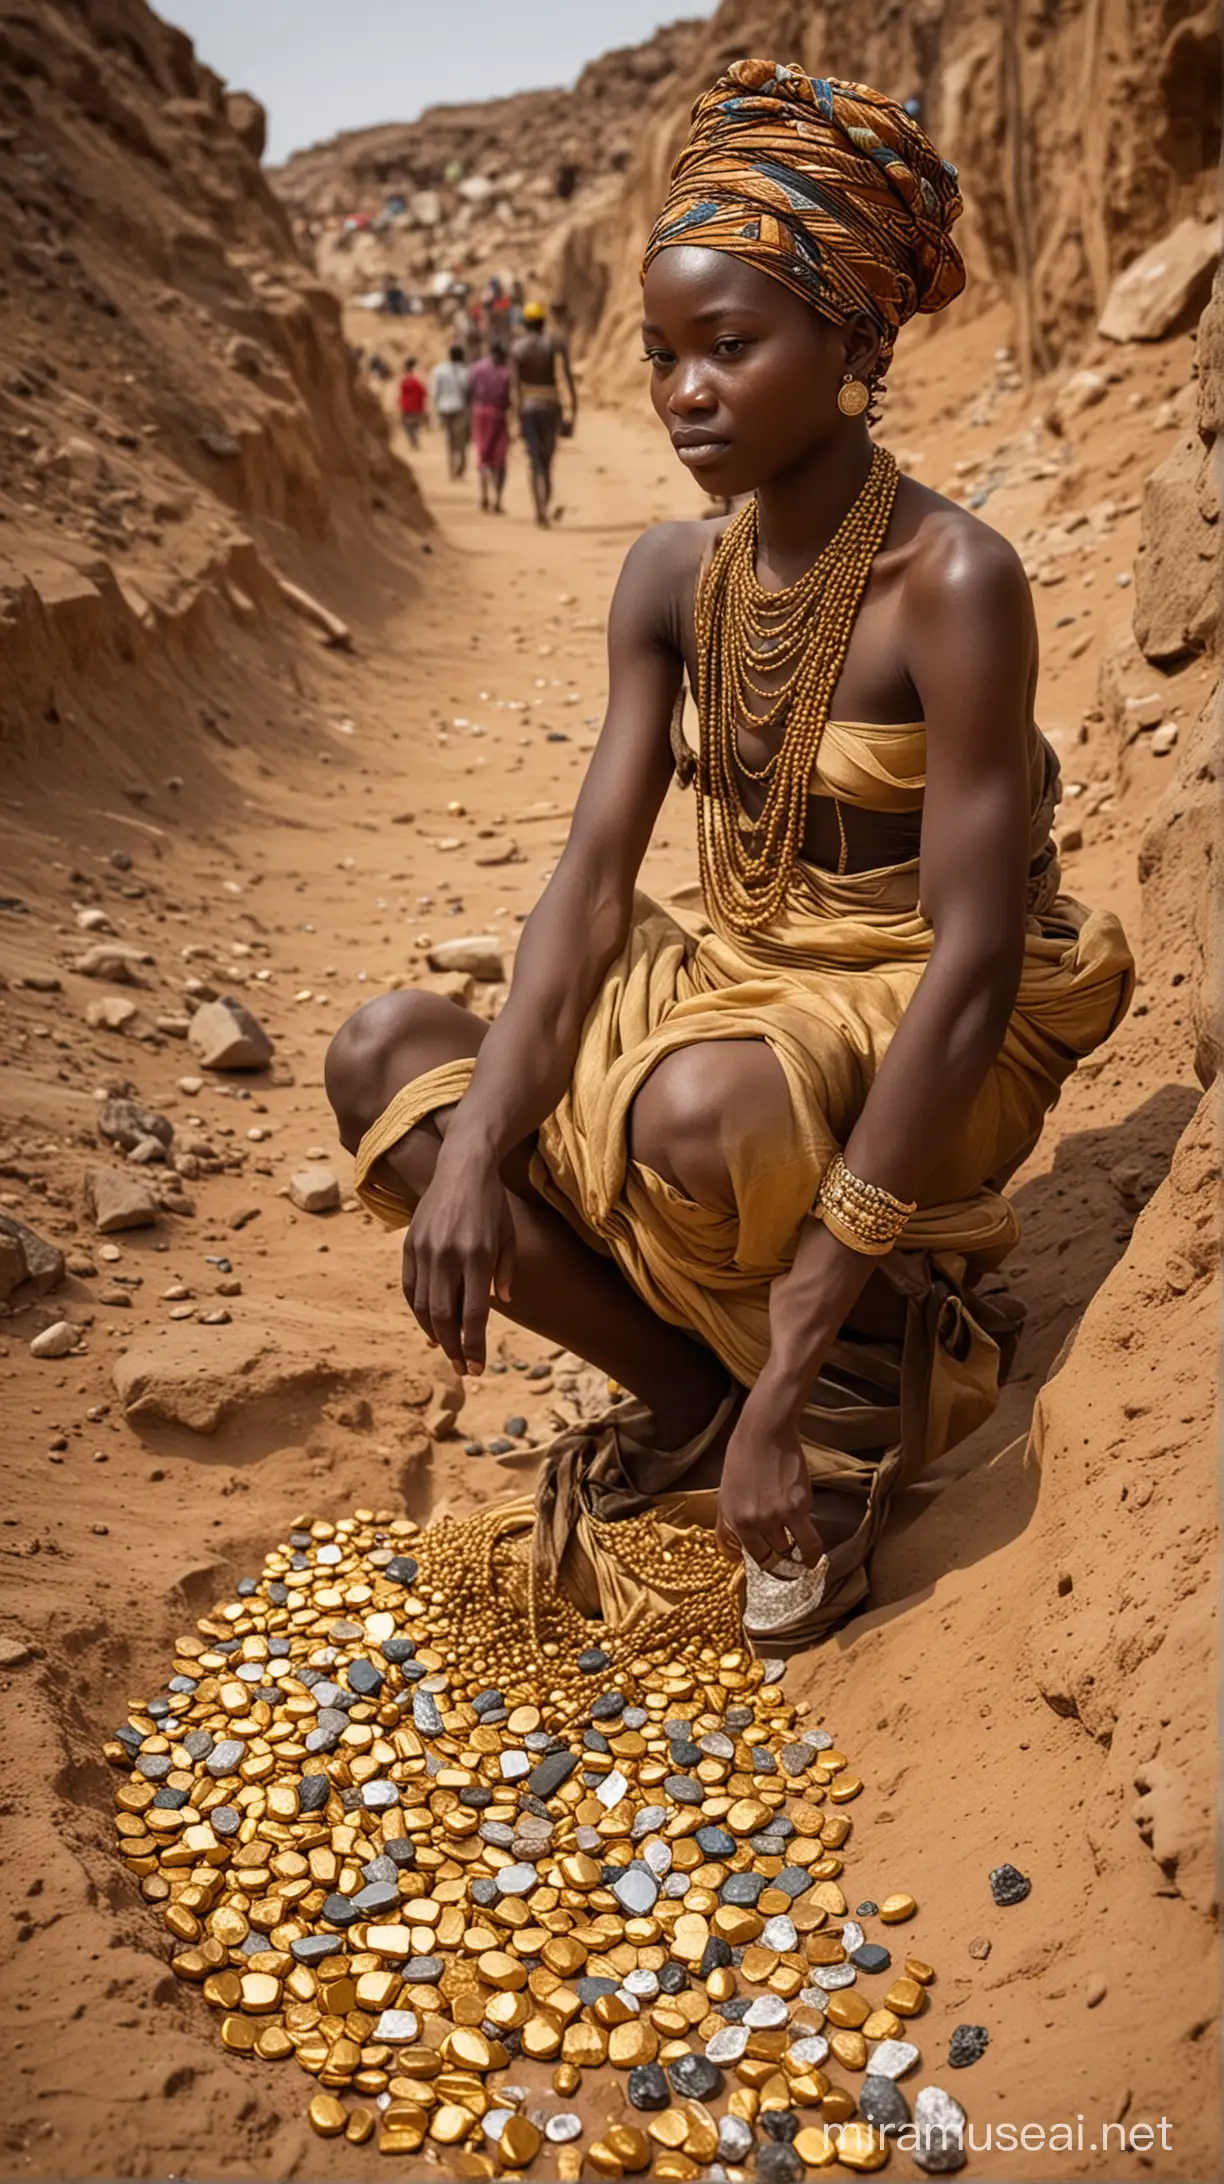 Gold, diamonds and precious stones mining in ancient Africa 